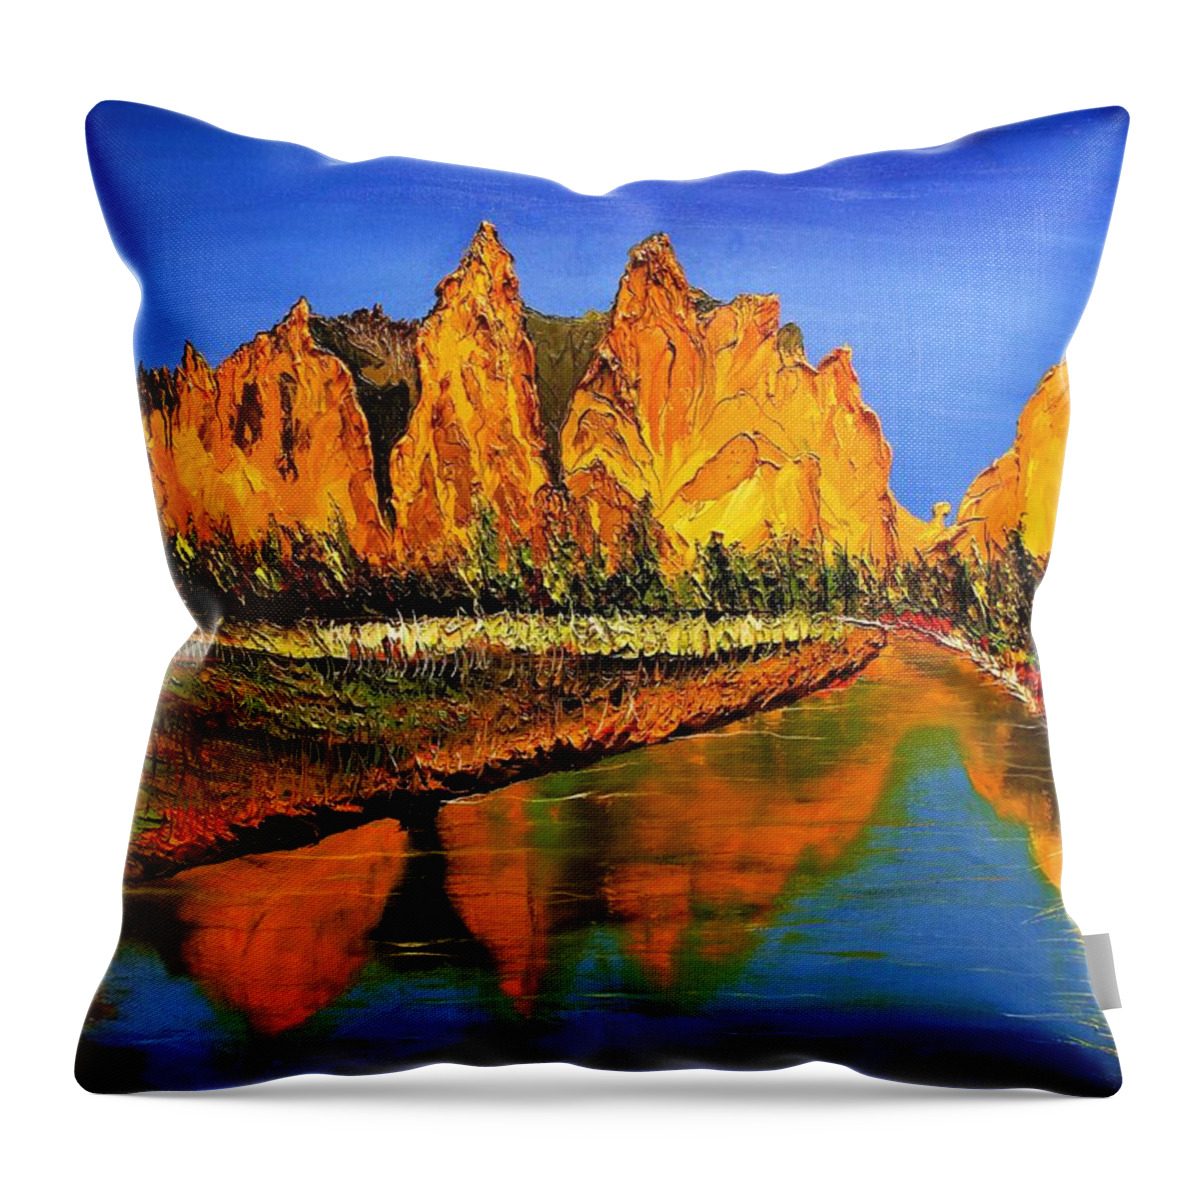  Throw Pillow featuring the painting Smith Rock At Sunset 2 by James Dunbar